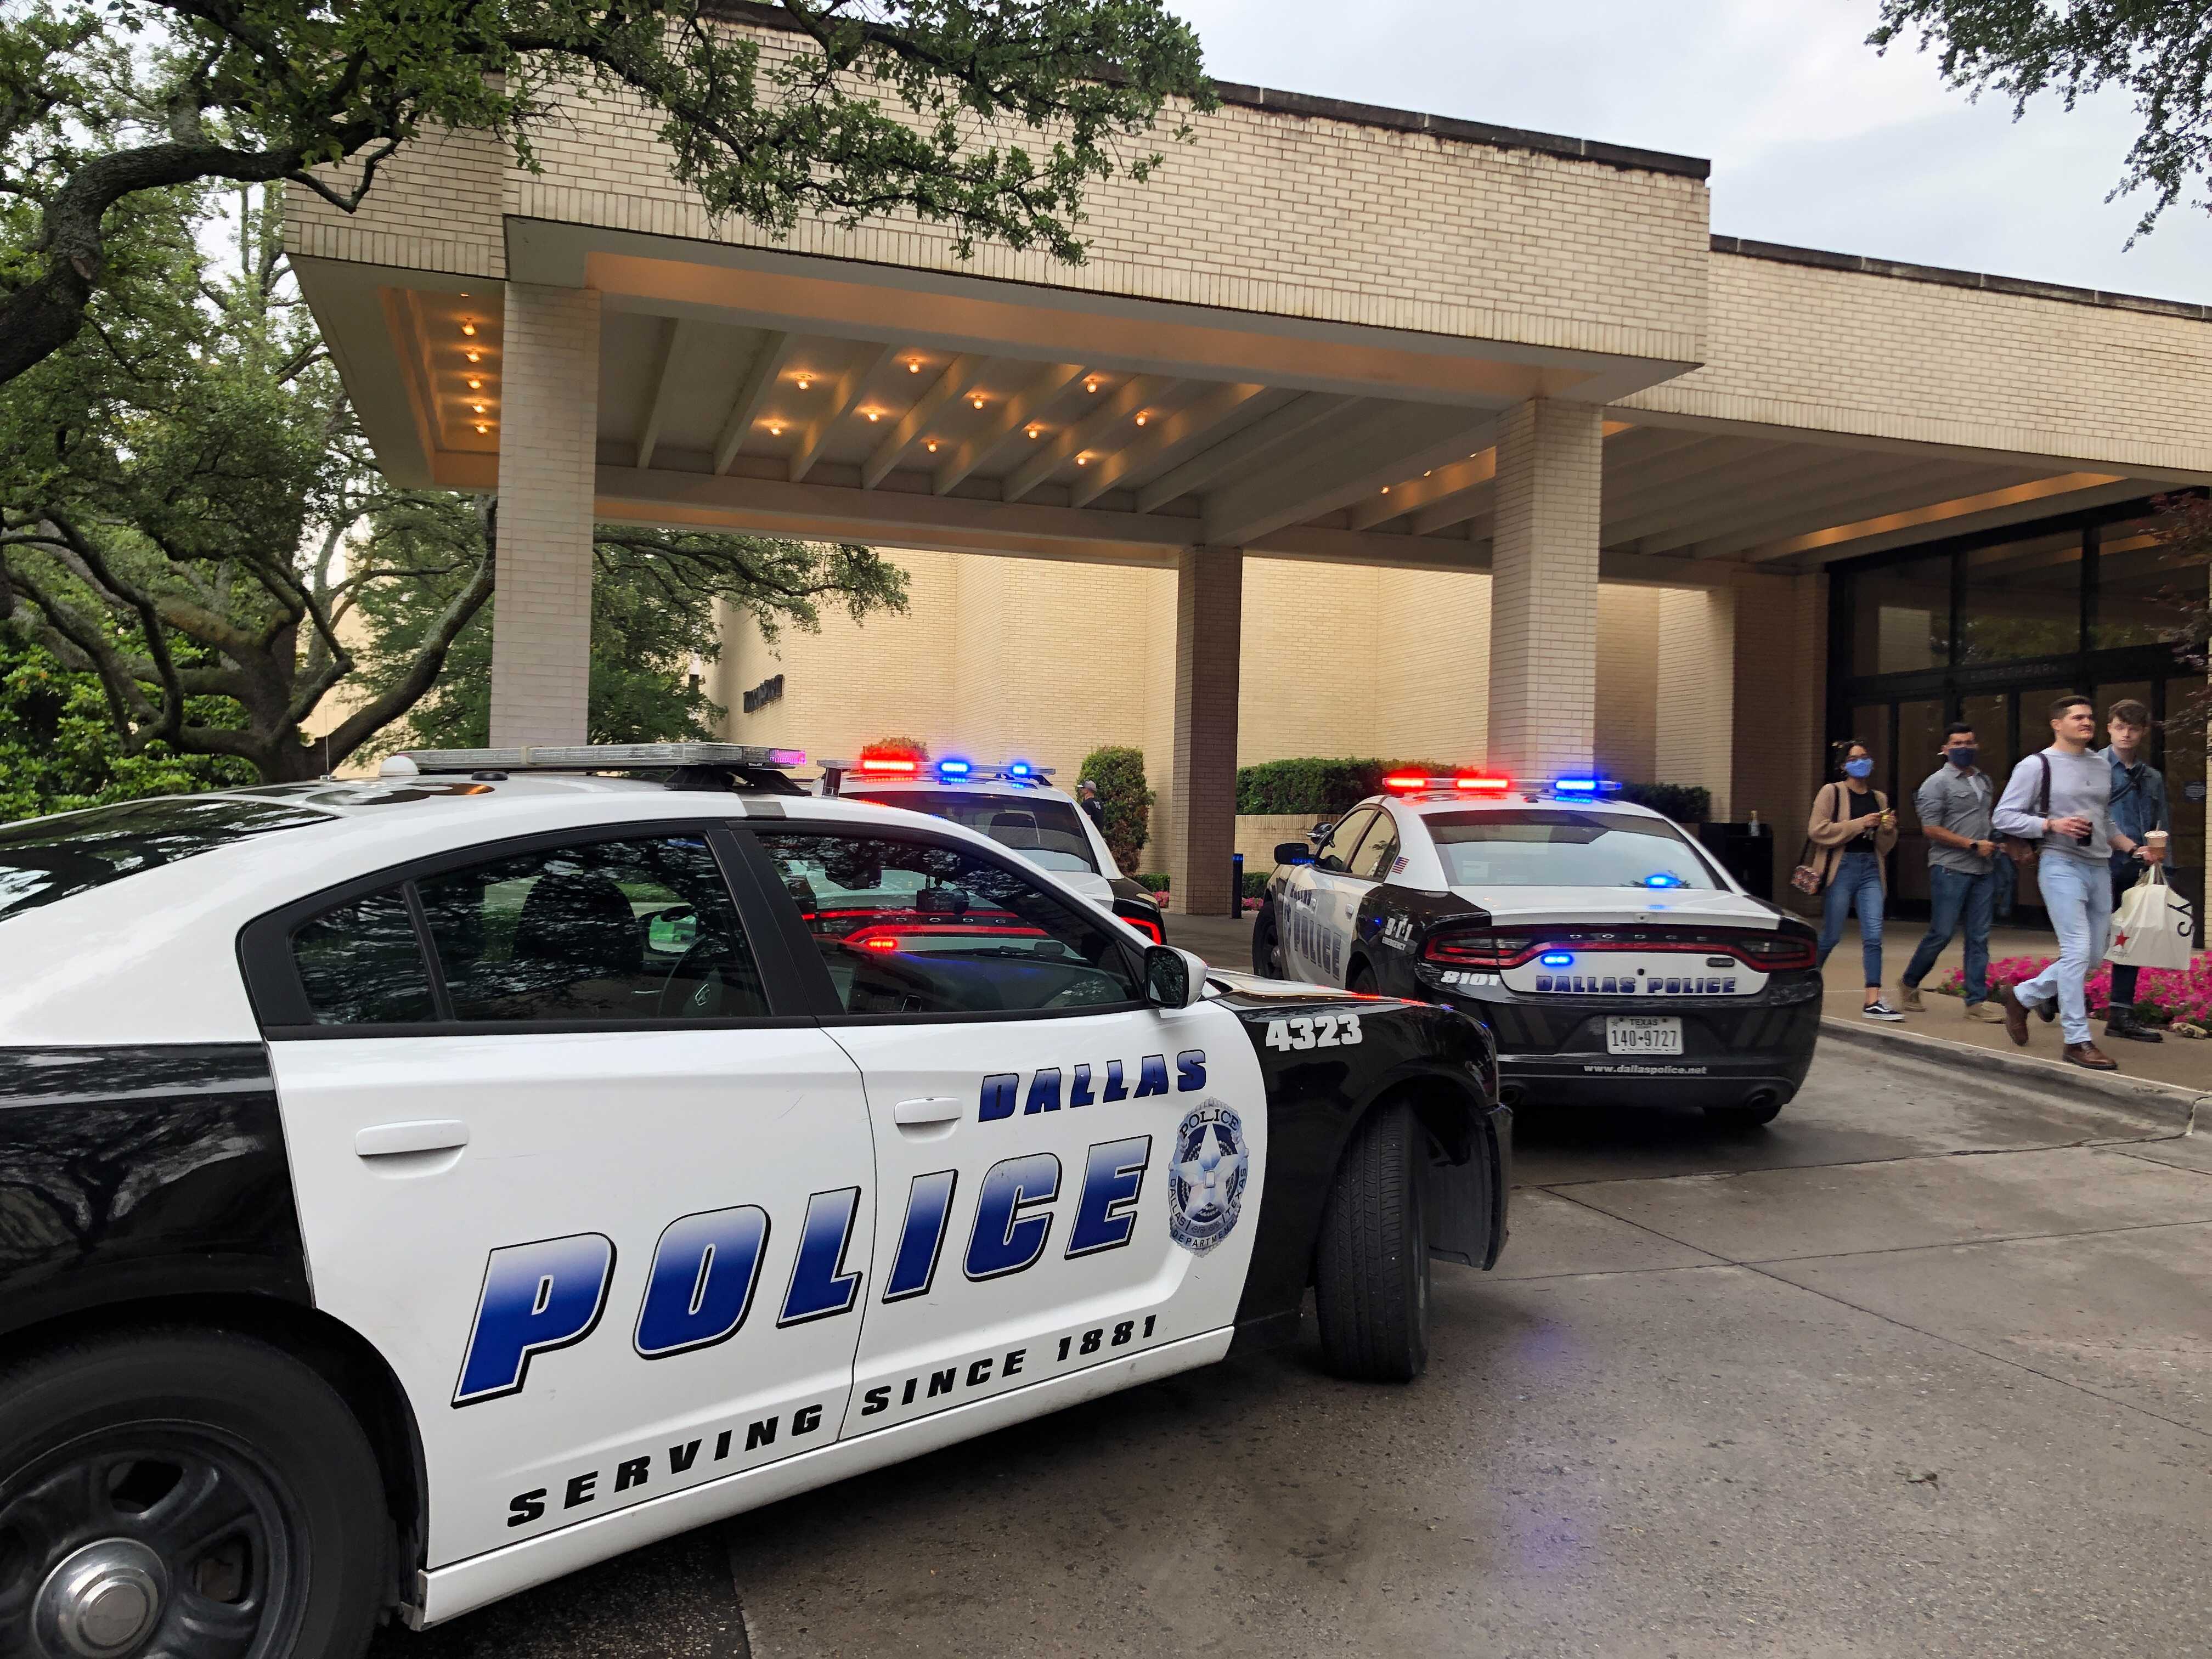 NorthPark Center shooting was actually banging skateboard: Police